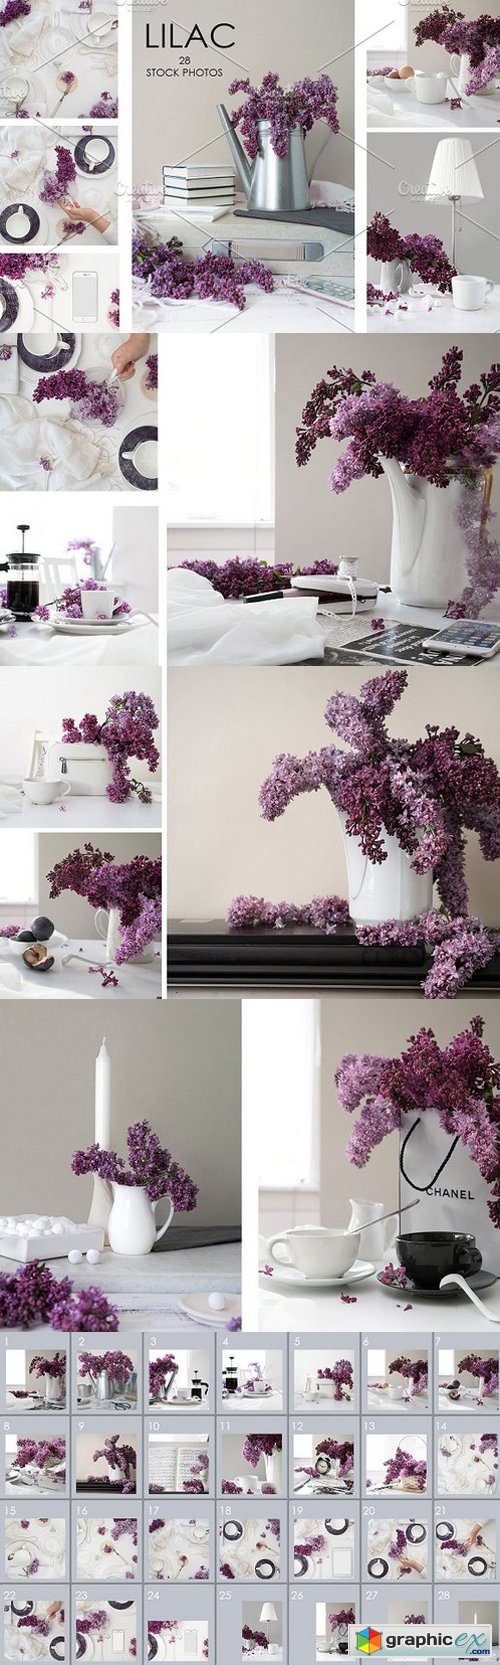 FLOWERS OF LILAC. 28 STOCK PHOTOS